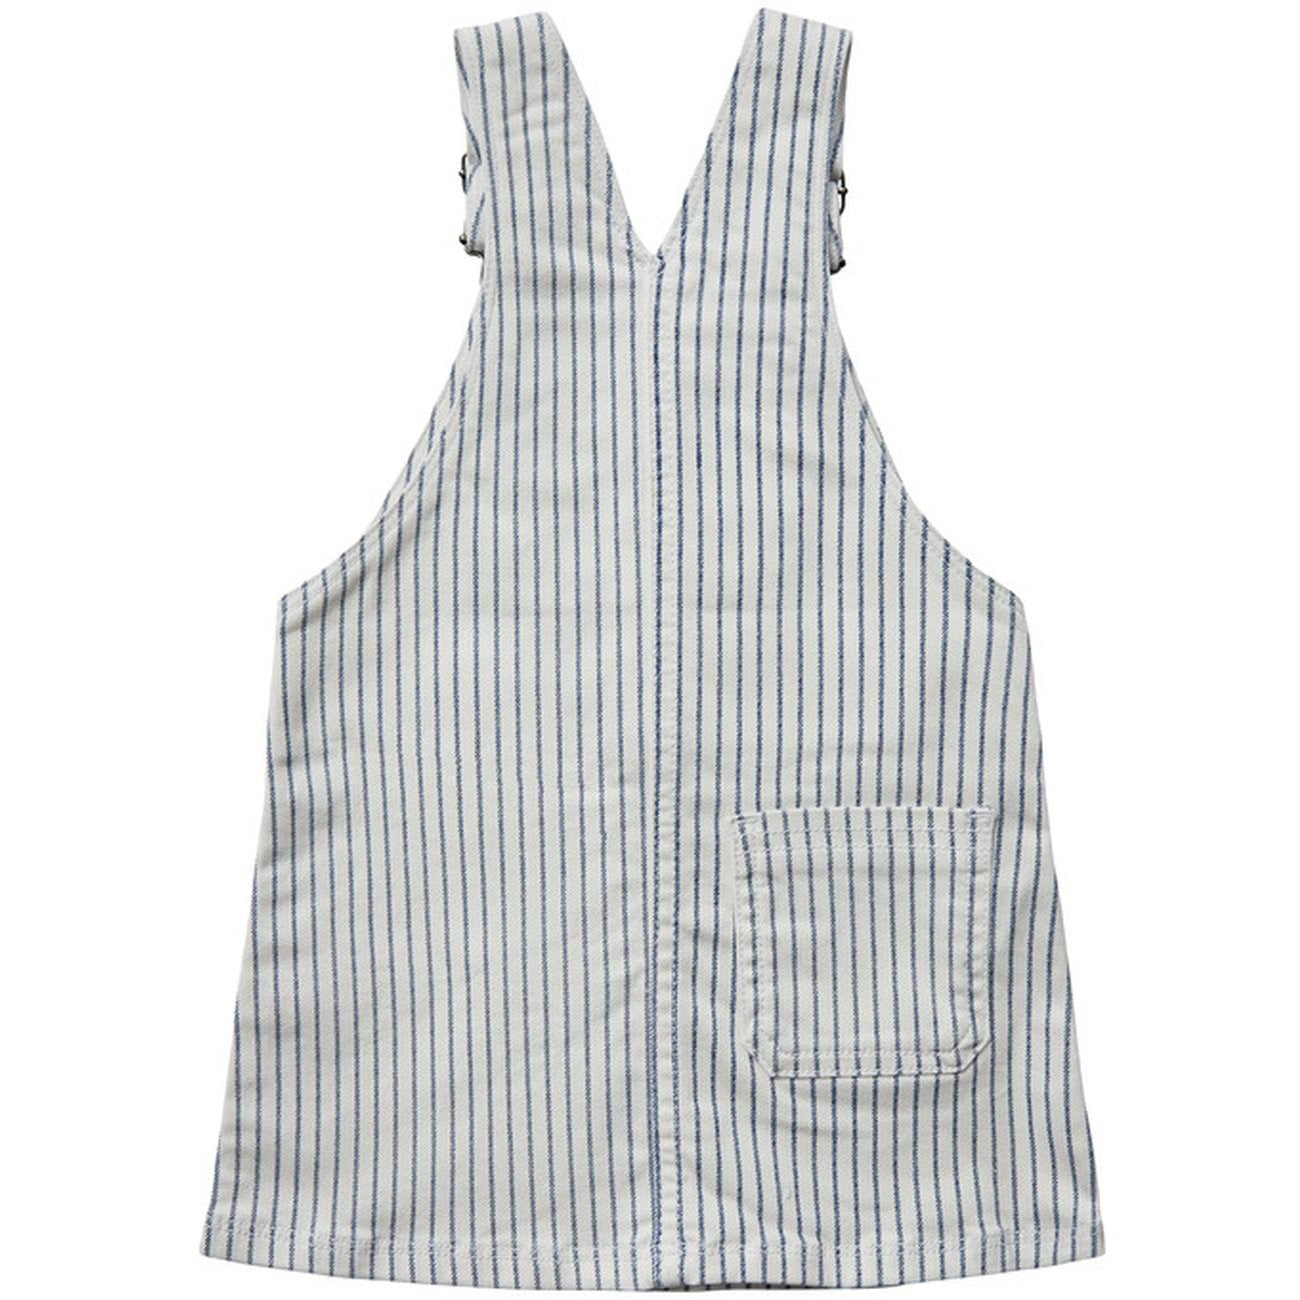 Sofie Schnoor Blue Striped Overall Dress 5